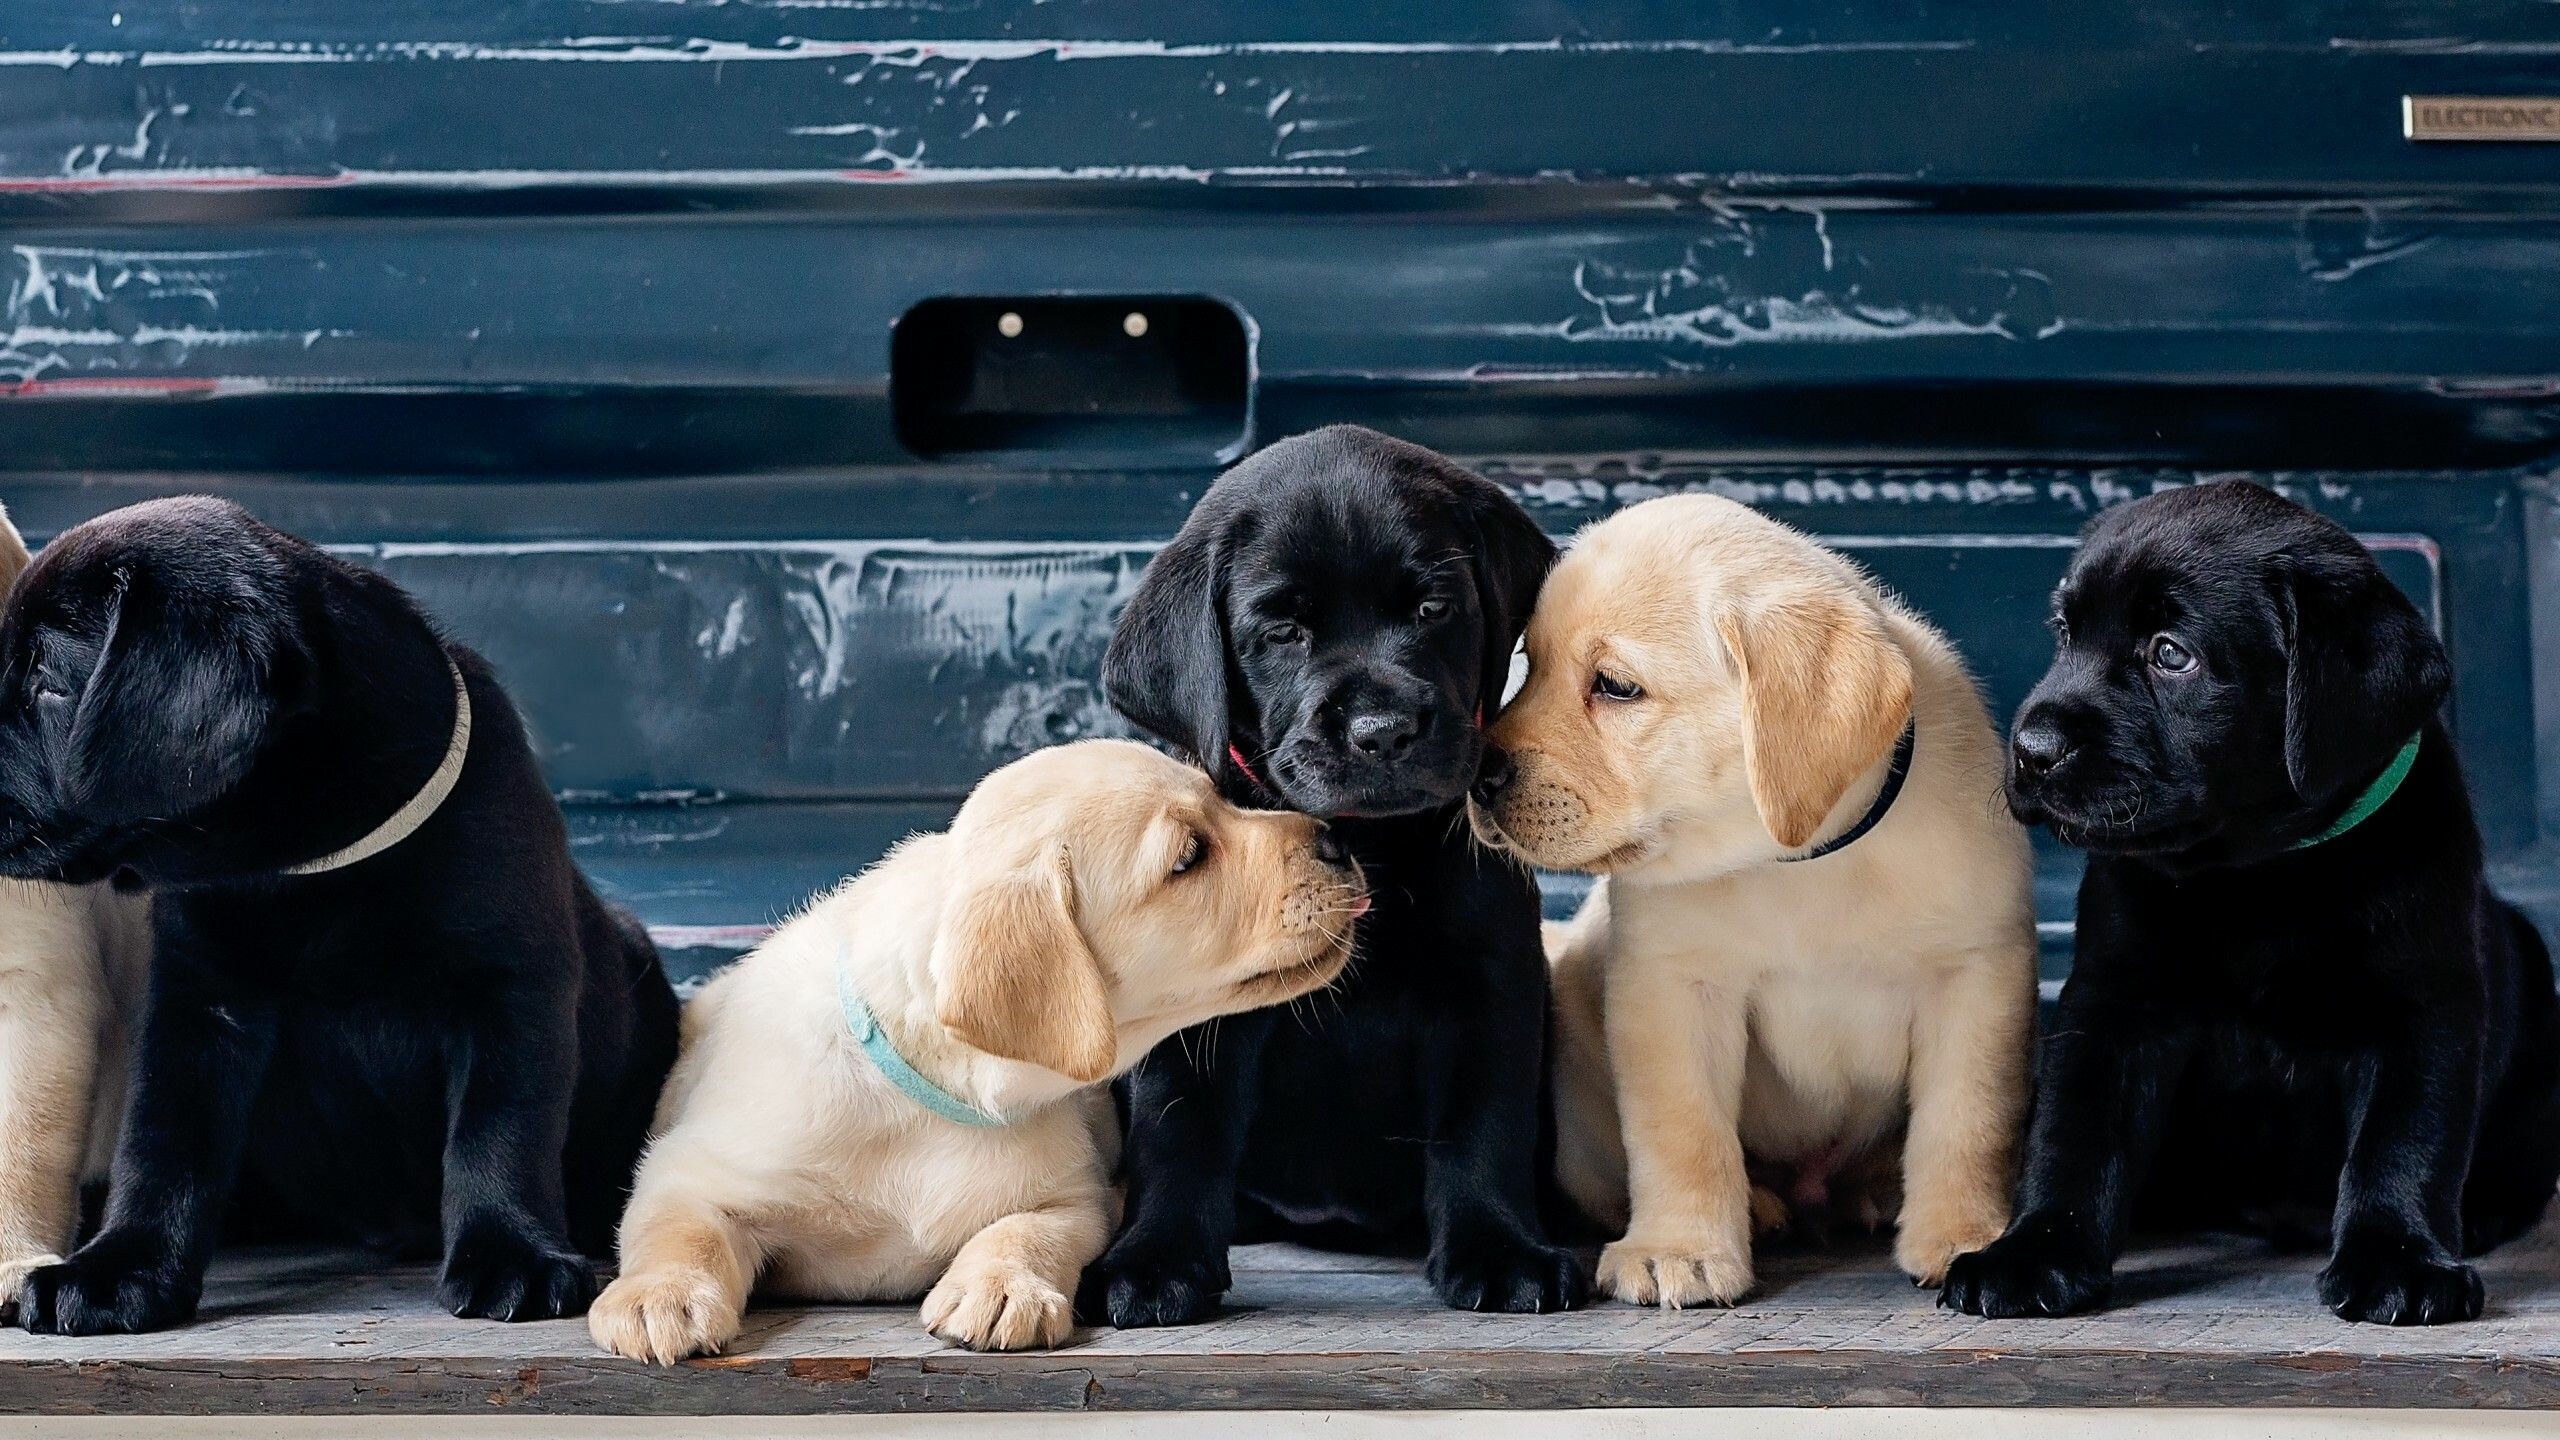 Labrador: Puppies of different colors can occur in the same litter, Dog breed. 2560x1440 HD Background.